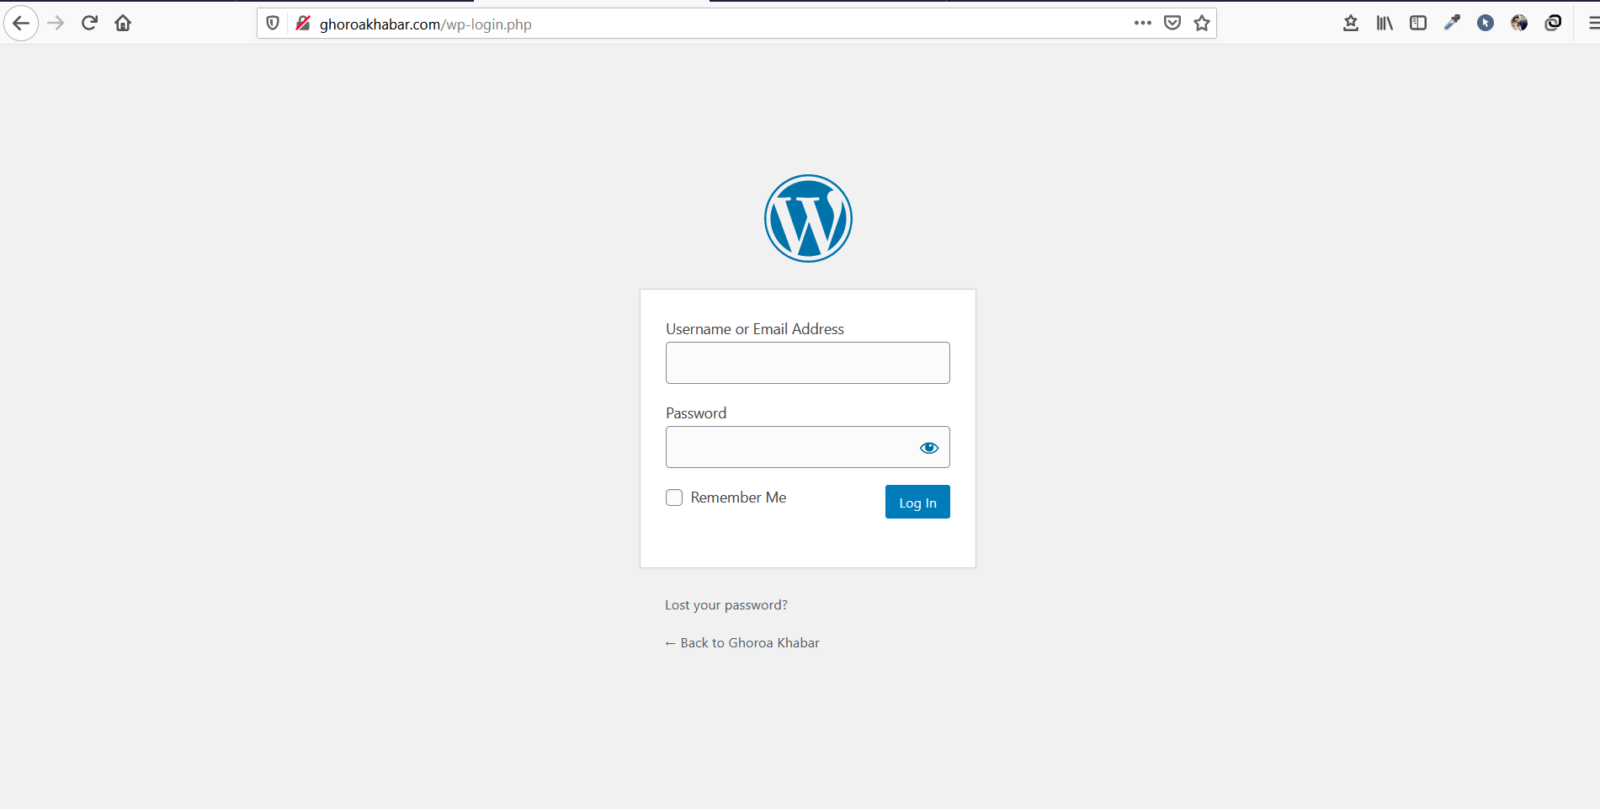 How to Manage Domain, Add Domain to Control Panel and Install WordPress